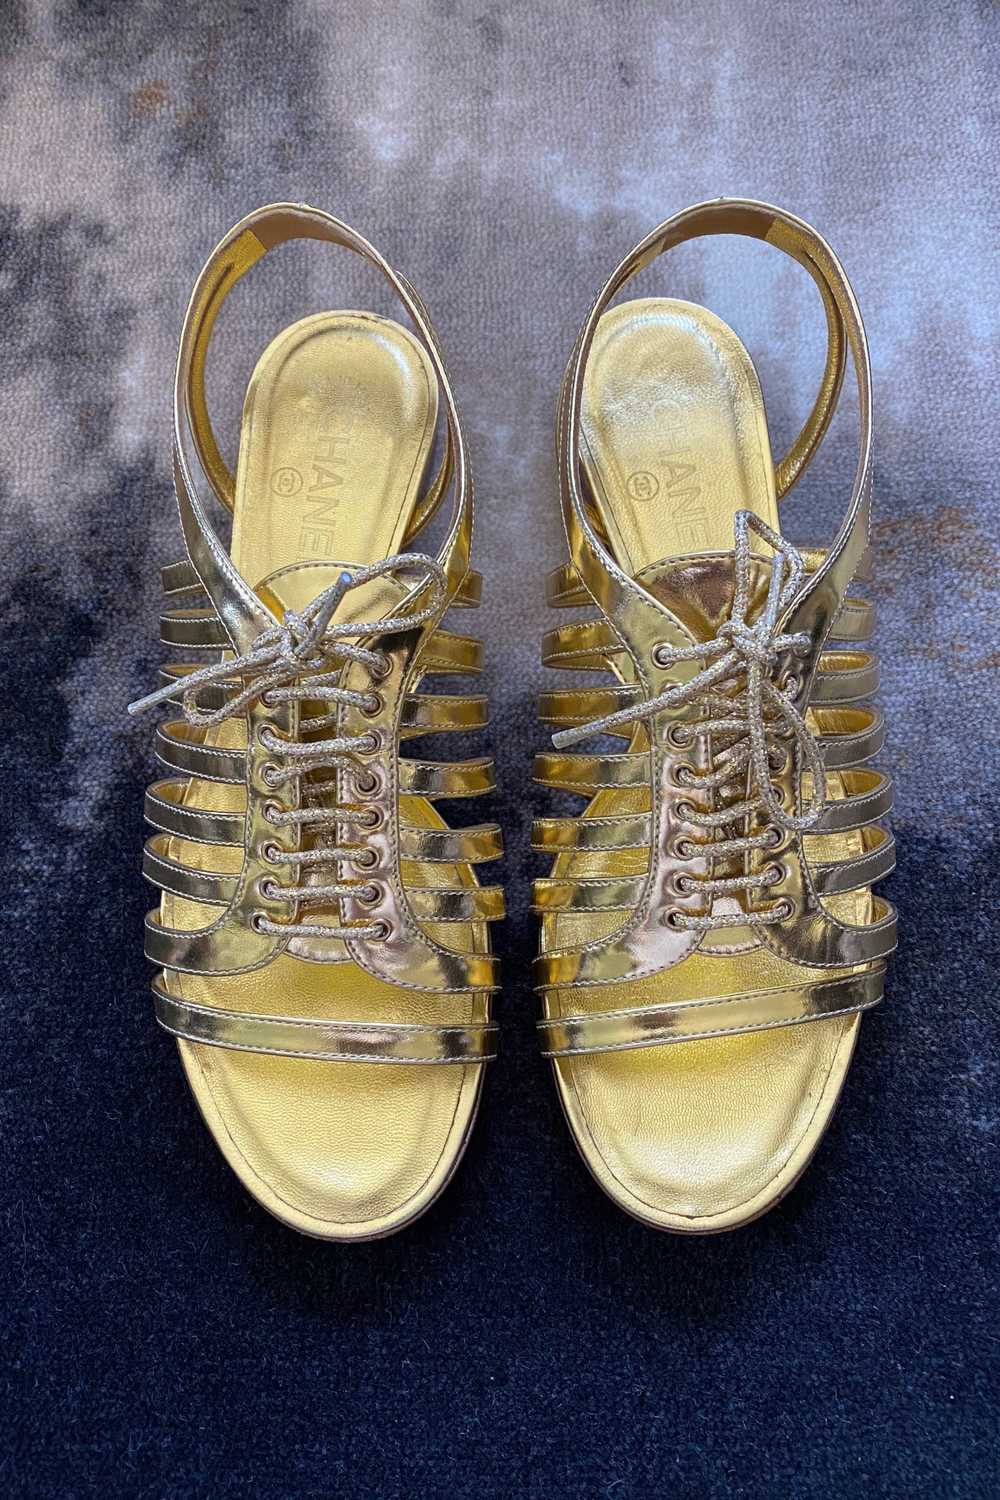 CHANEL GOLD LACE-UP CAGE SHOE - image 2